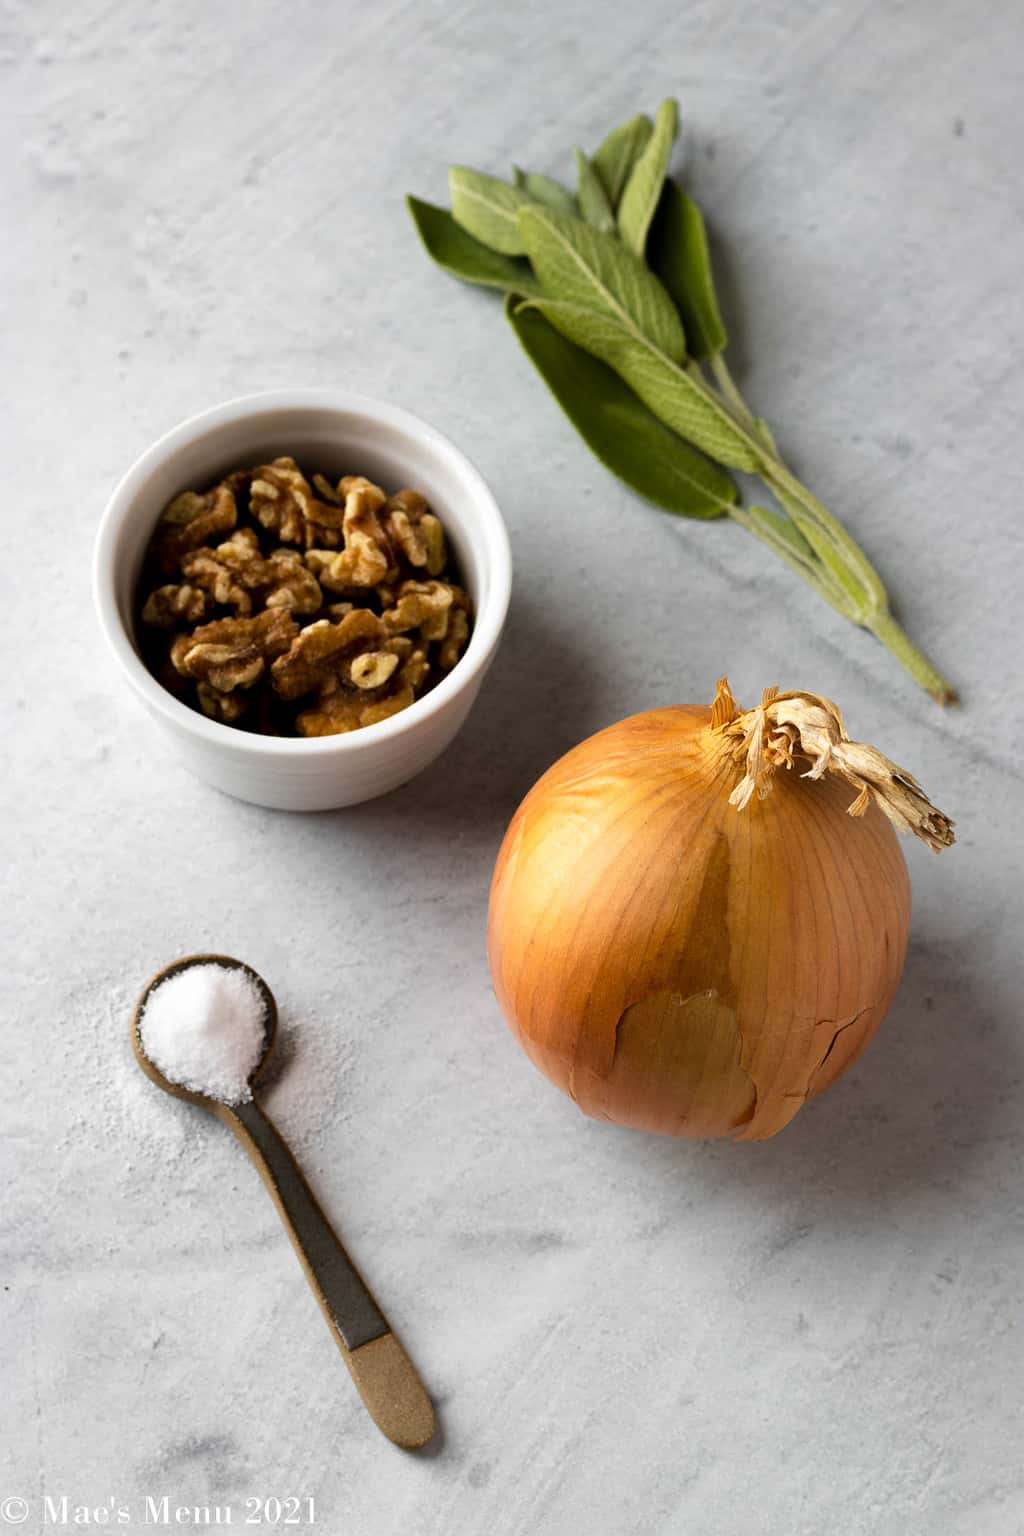 An up-close shot of an onion, cup of walnuts, sprig of sage, and small spoon of salt.